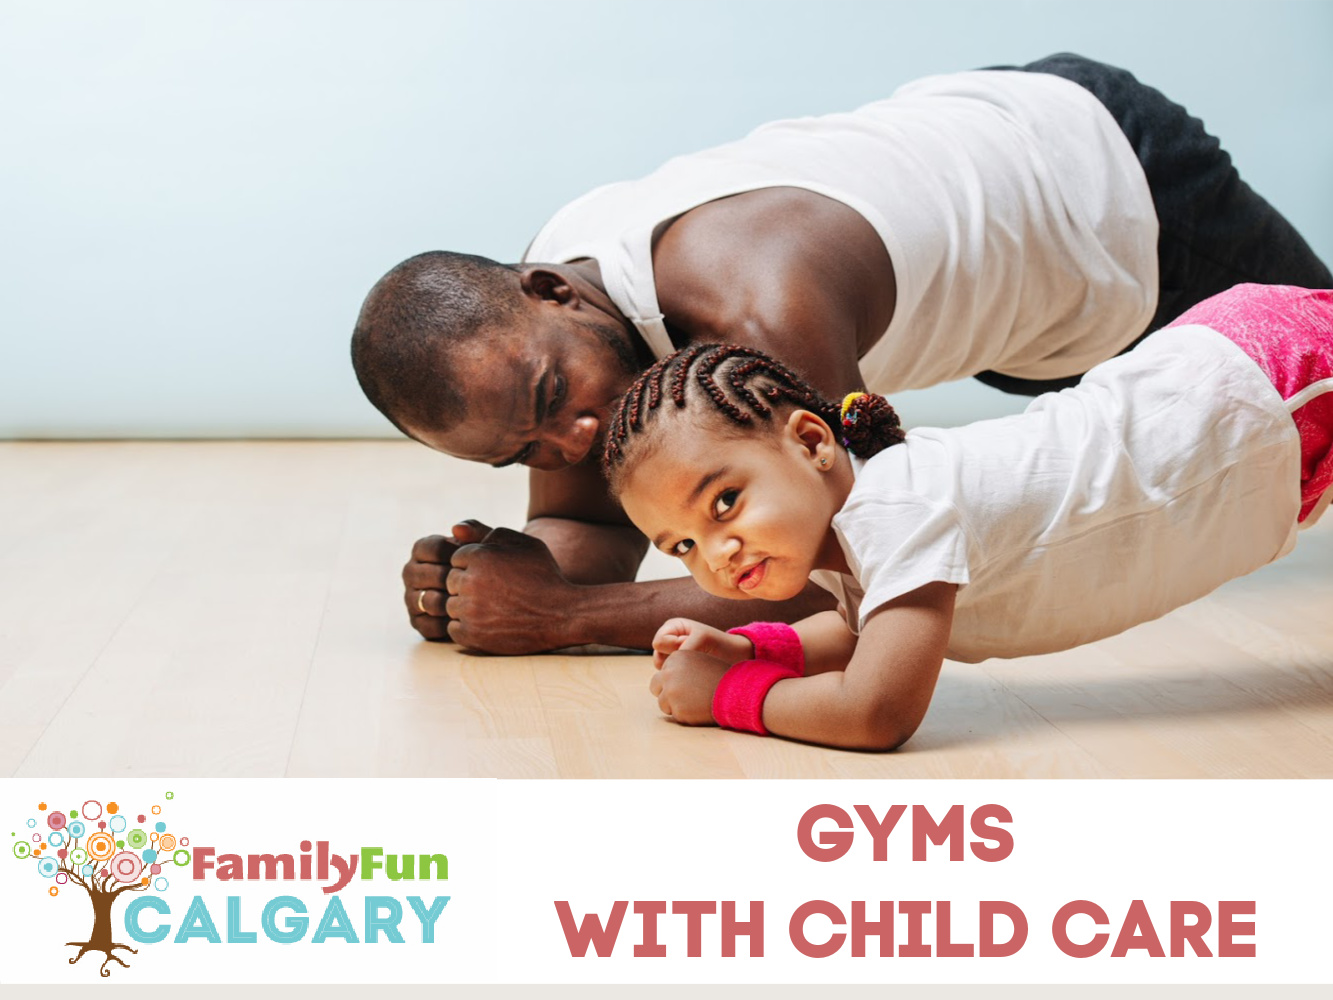 Gyms With Child Care (Family Fun Calgary)